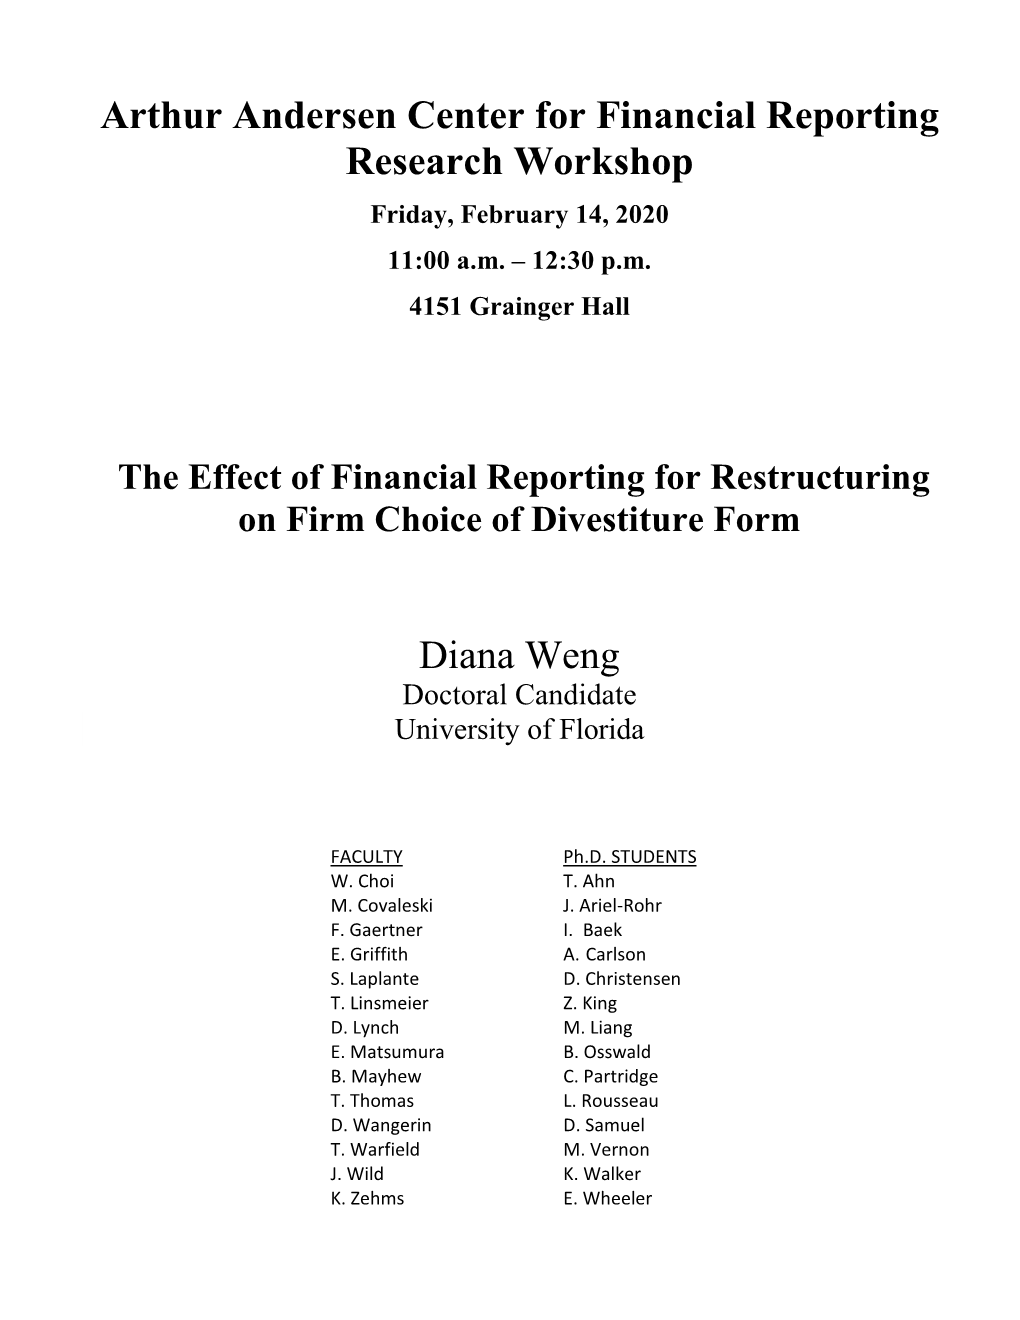 Arthur Andersen Center for Financial Reporting Research Workshop